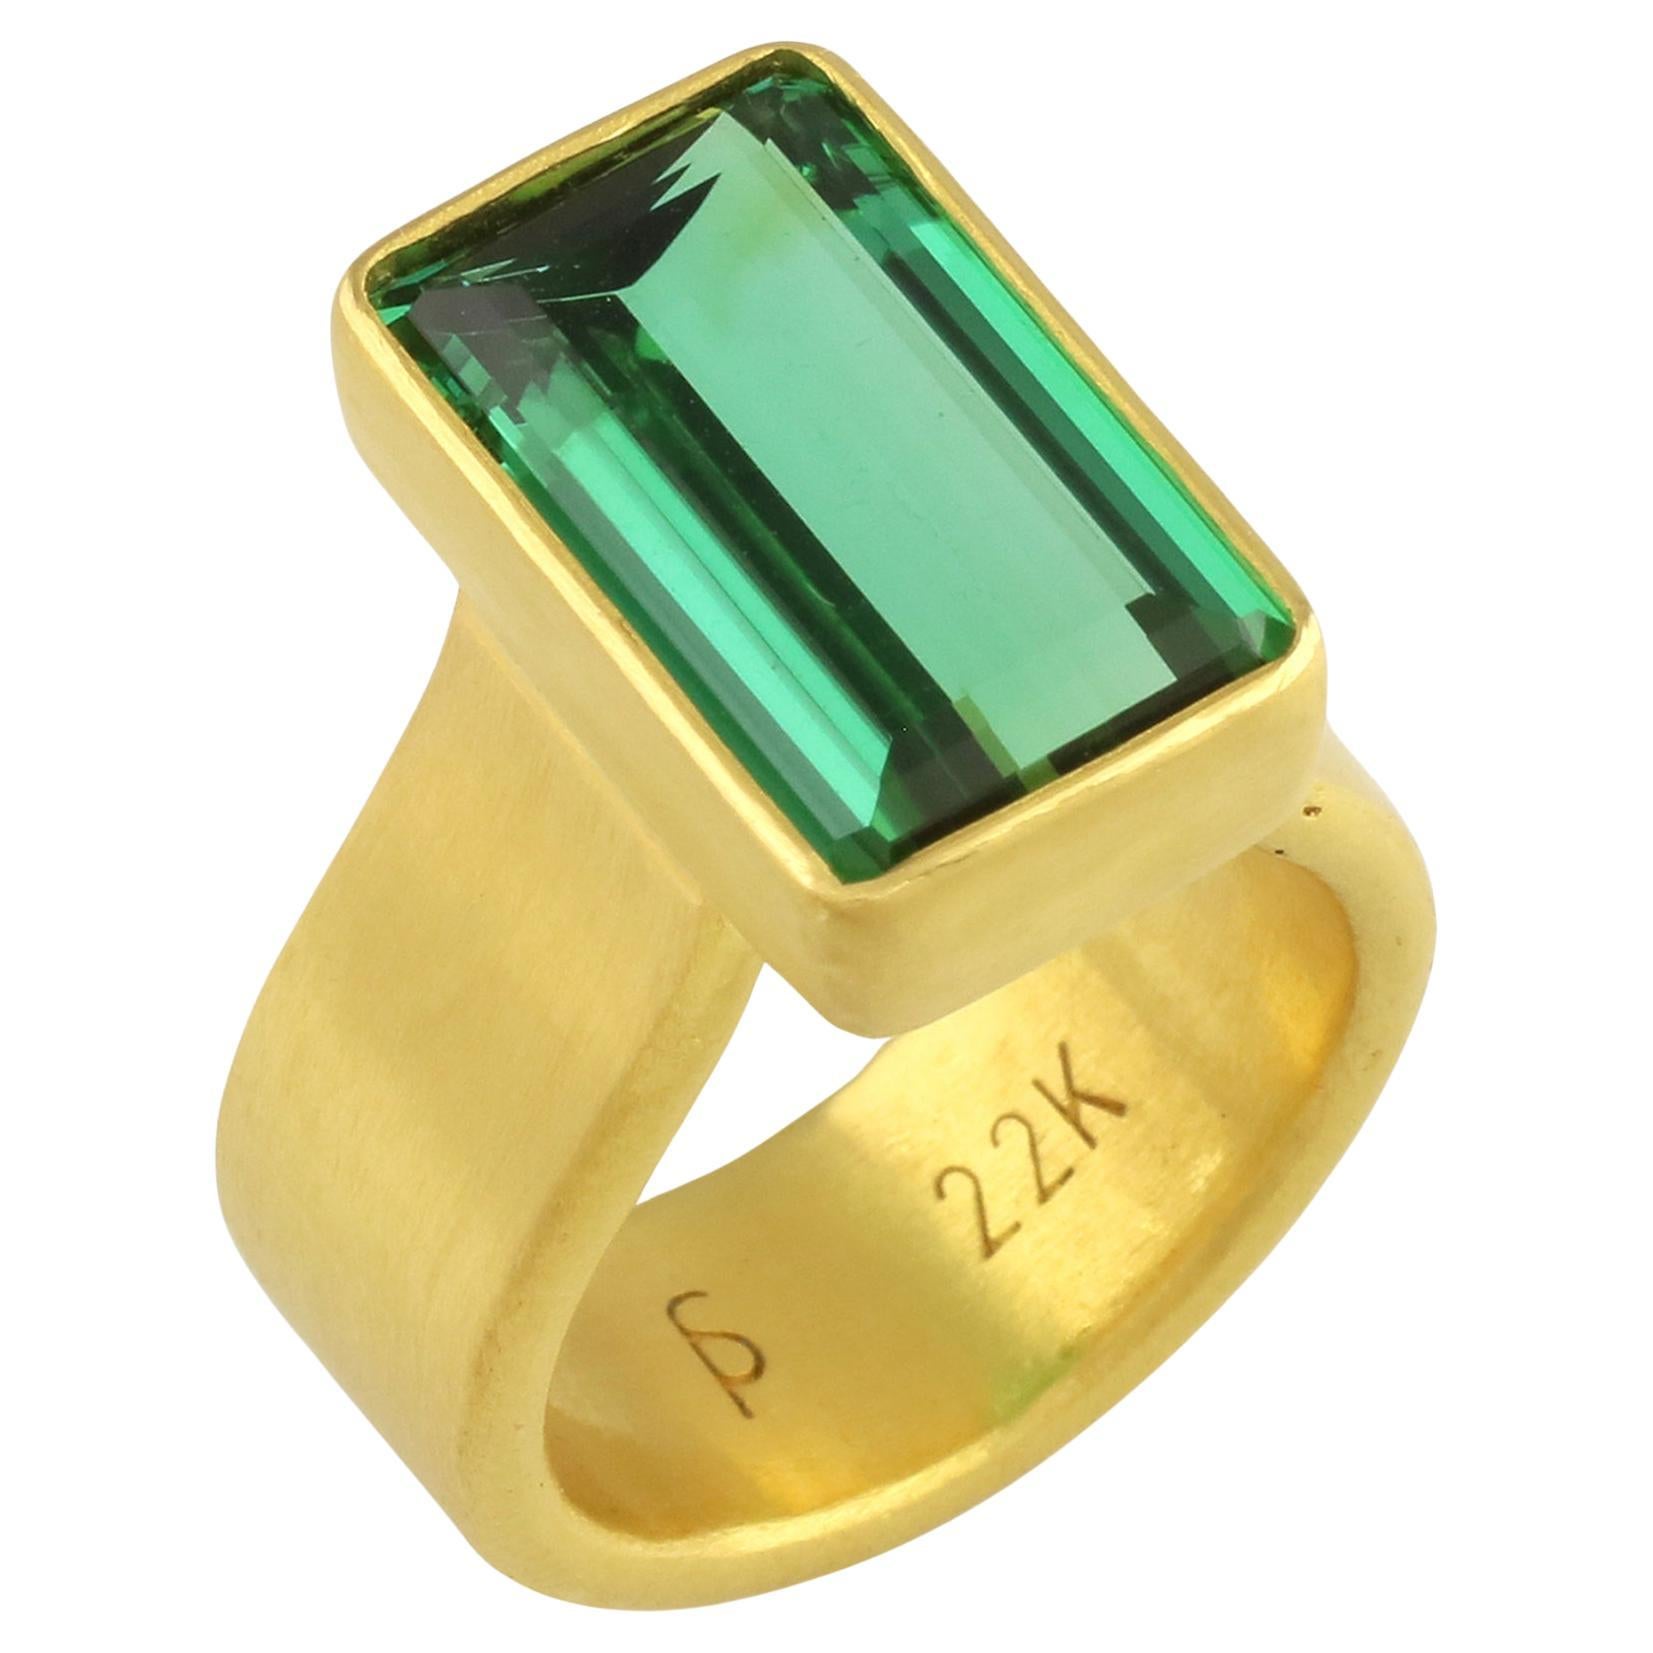 PHILIPPE SPENCER 8.4 Ct. Extra-Fine Tourmaline Statement Ring in 22K Gold For Sale